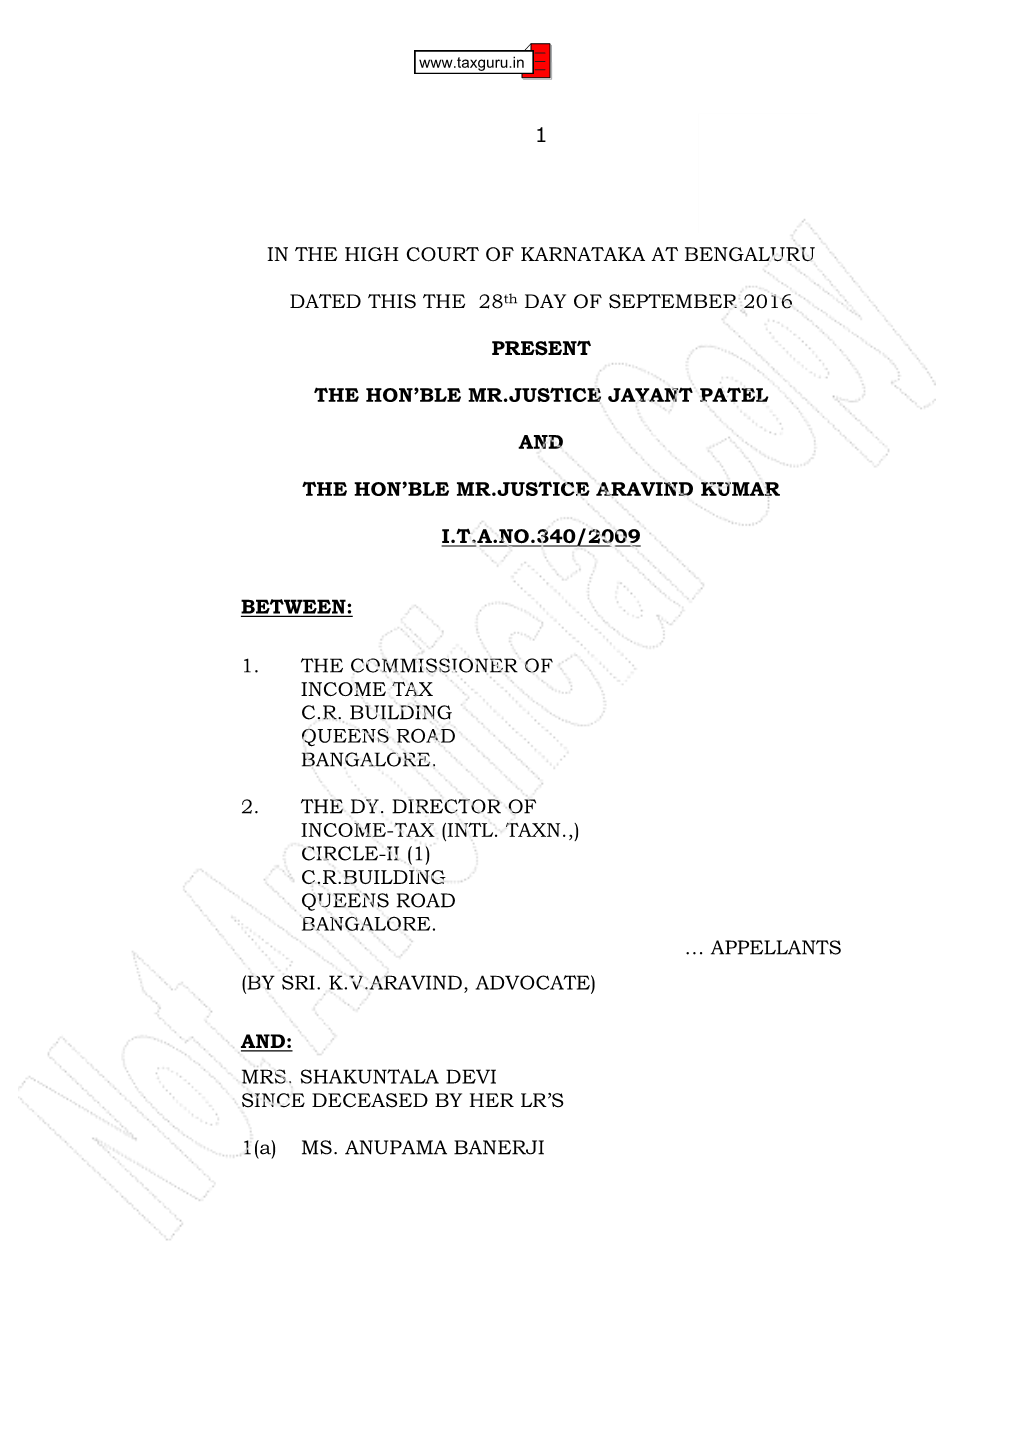 1 in the HIGH COURT of KARNATAKA at BENGALURU DATED THIS the 28Th DAY of SEPTEMBER 2016 PRESENT the HON'ble MR.JUSTICE JAYANT